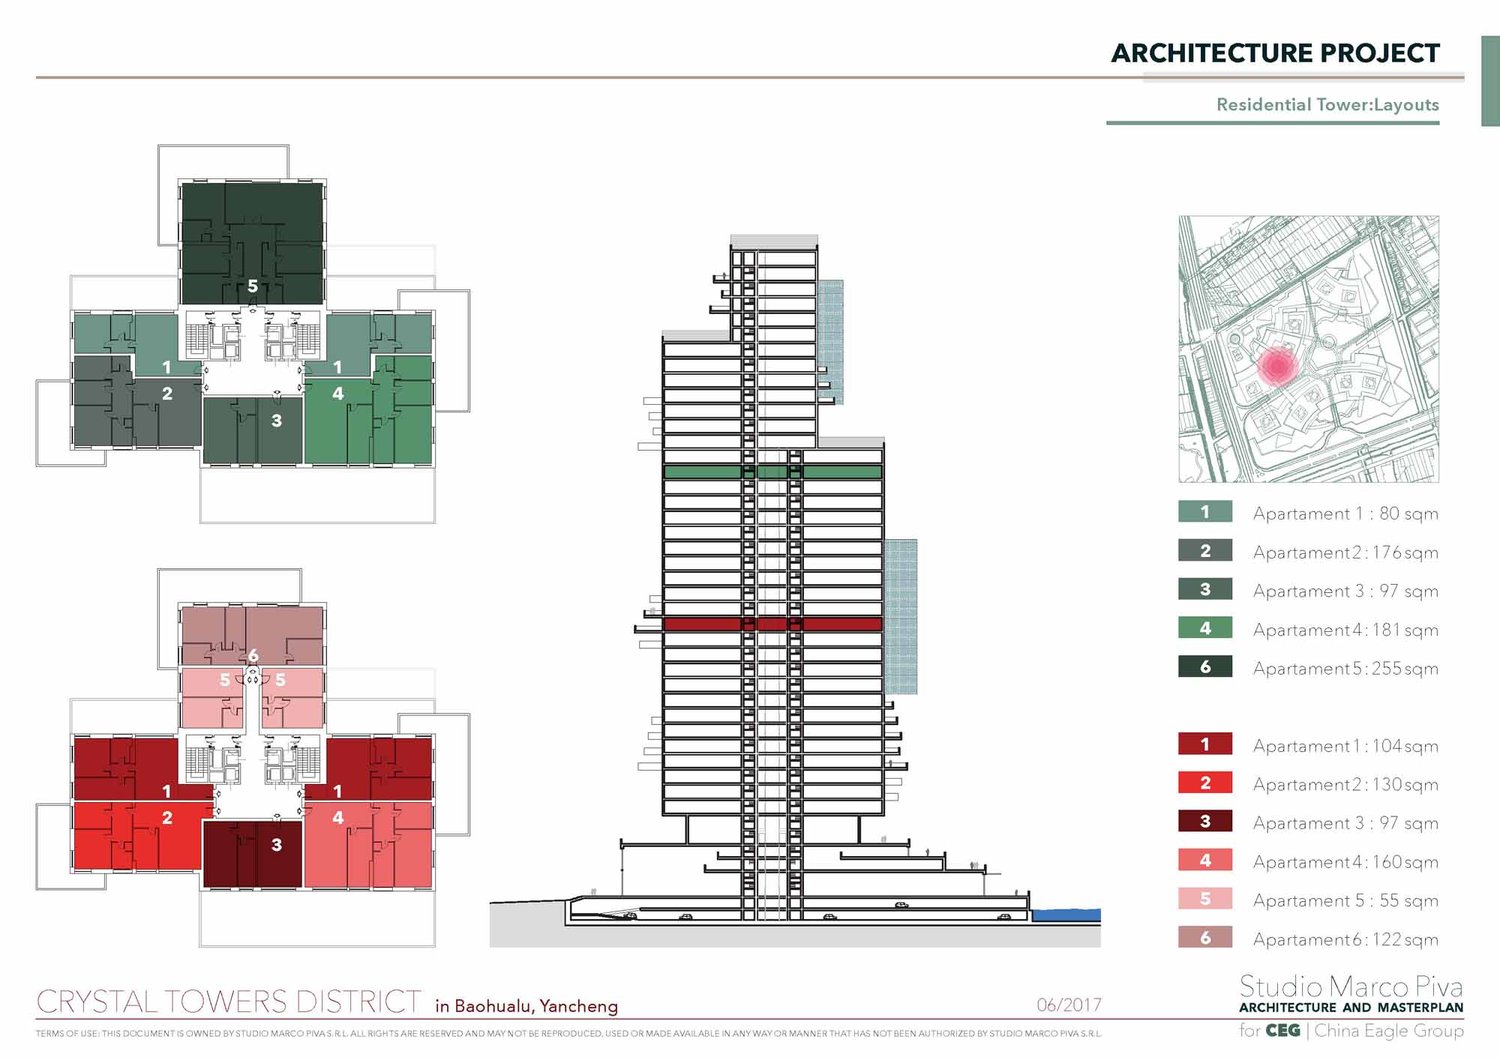 Crystal Towers residential tower layout | Studio Marco Piva